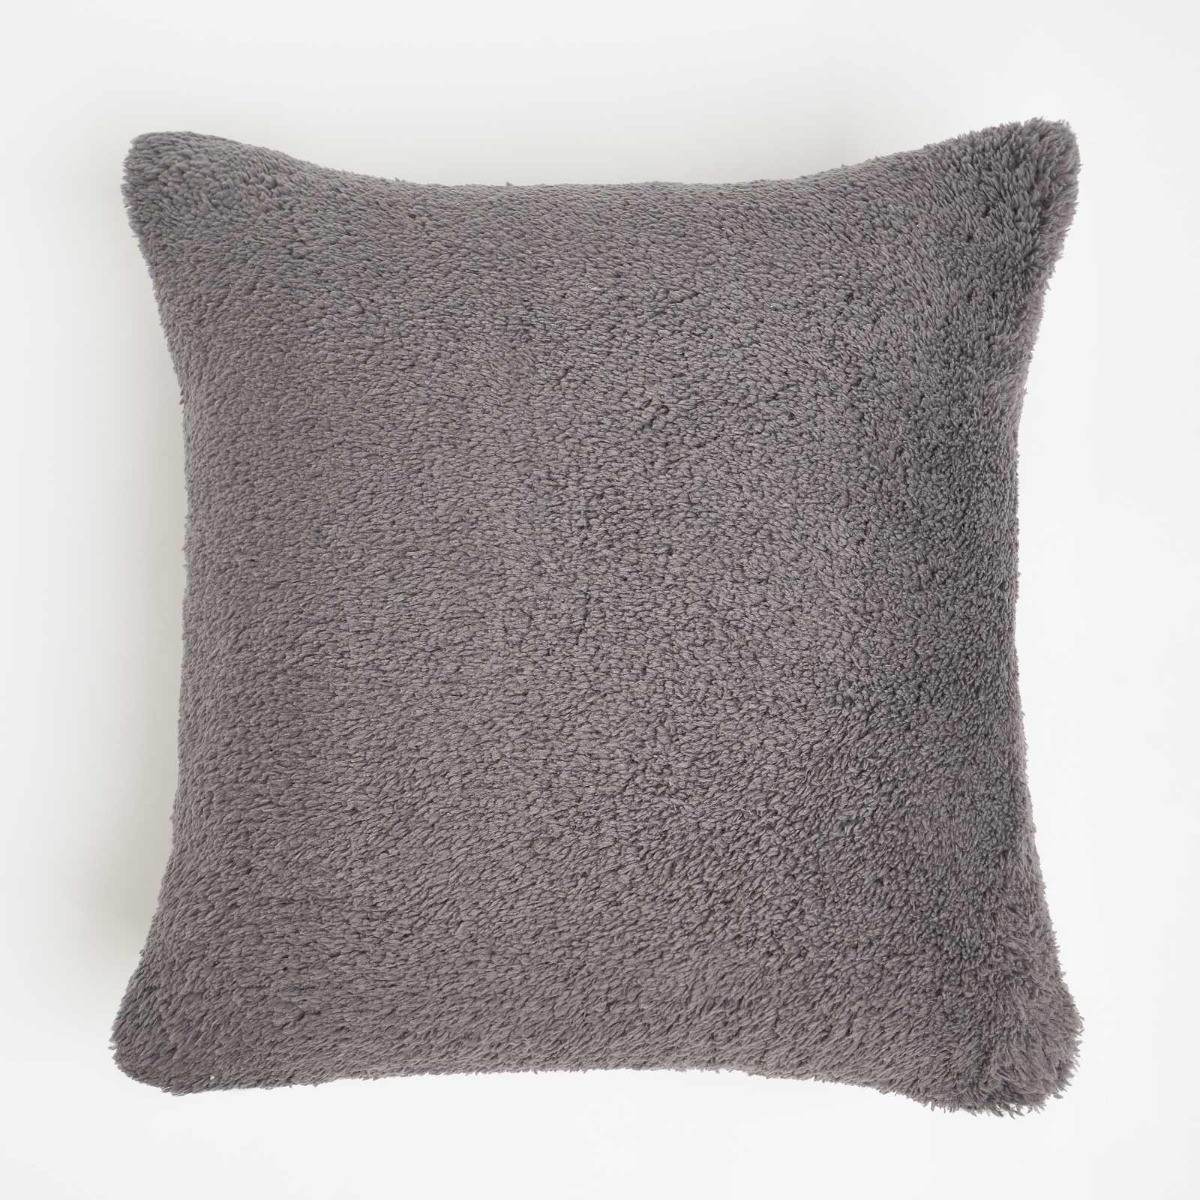 Brentfords Teddy Cushion Covers - Charcoal>